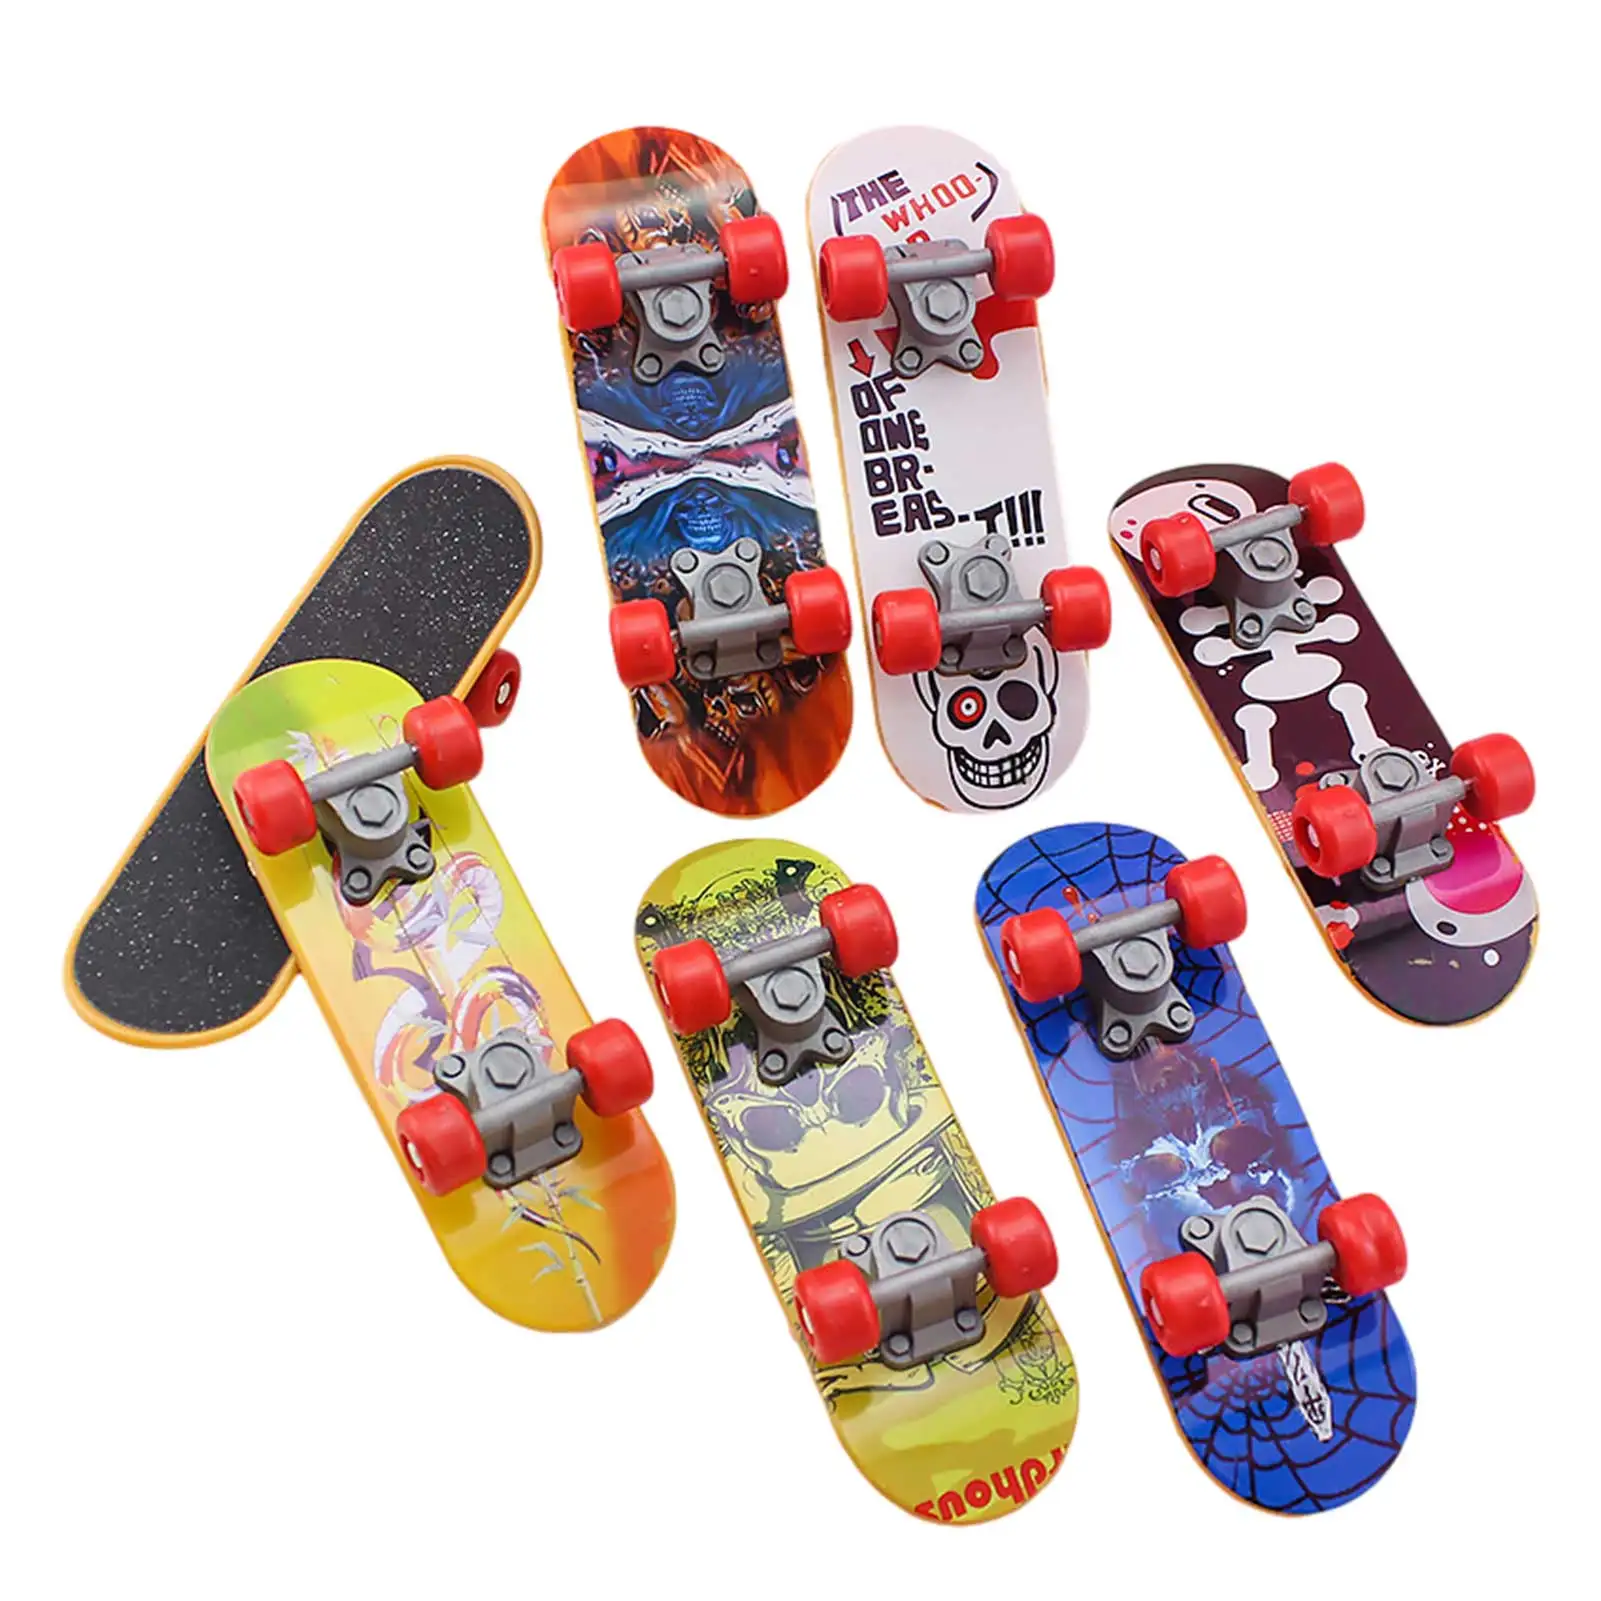 3 pcs Finger Toy Mini Skateboard Kids Playing Toy Child Fingerboard Playing Toys 